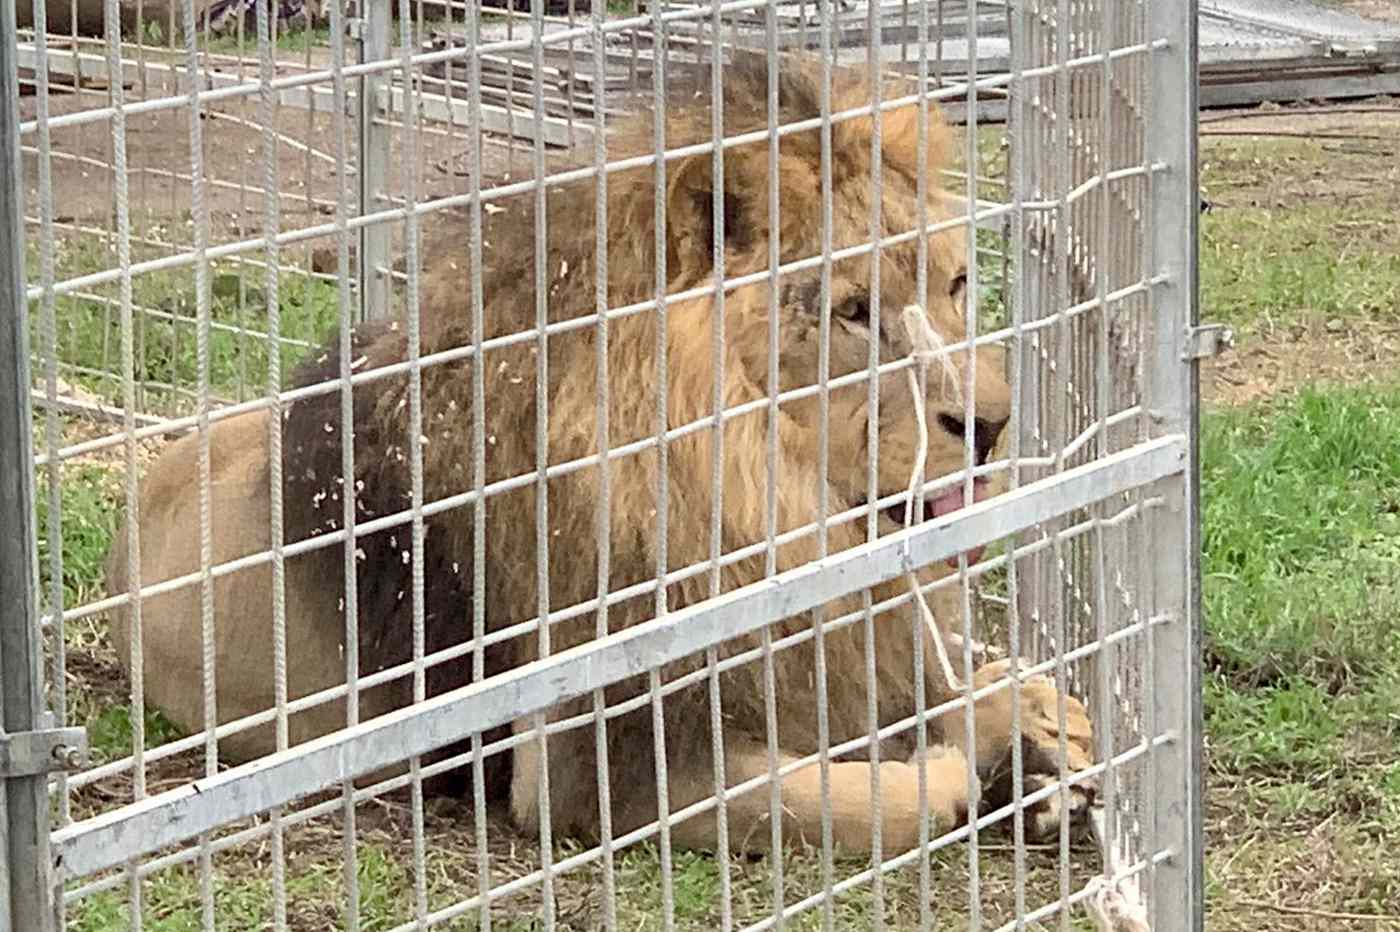 Lion On The Loose: Italian Circus Escape Causes Stir In Rome